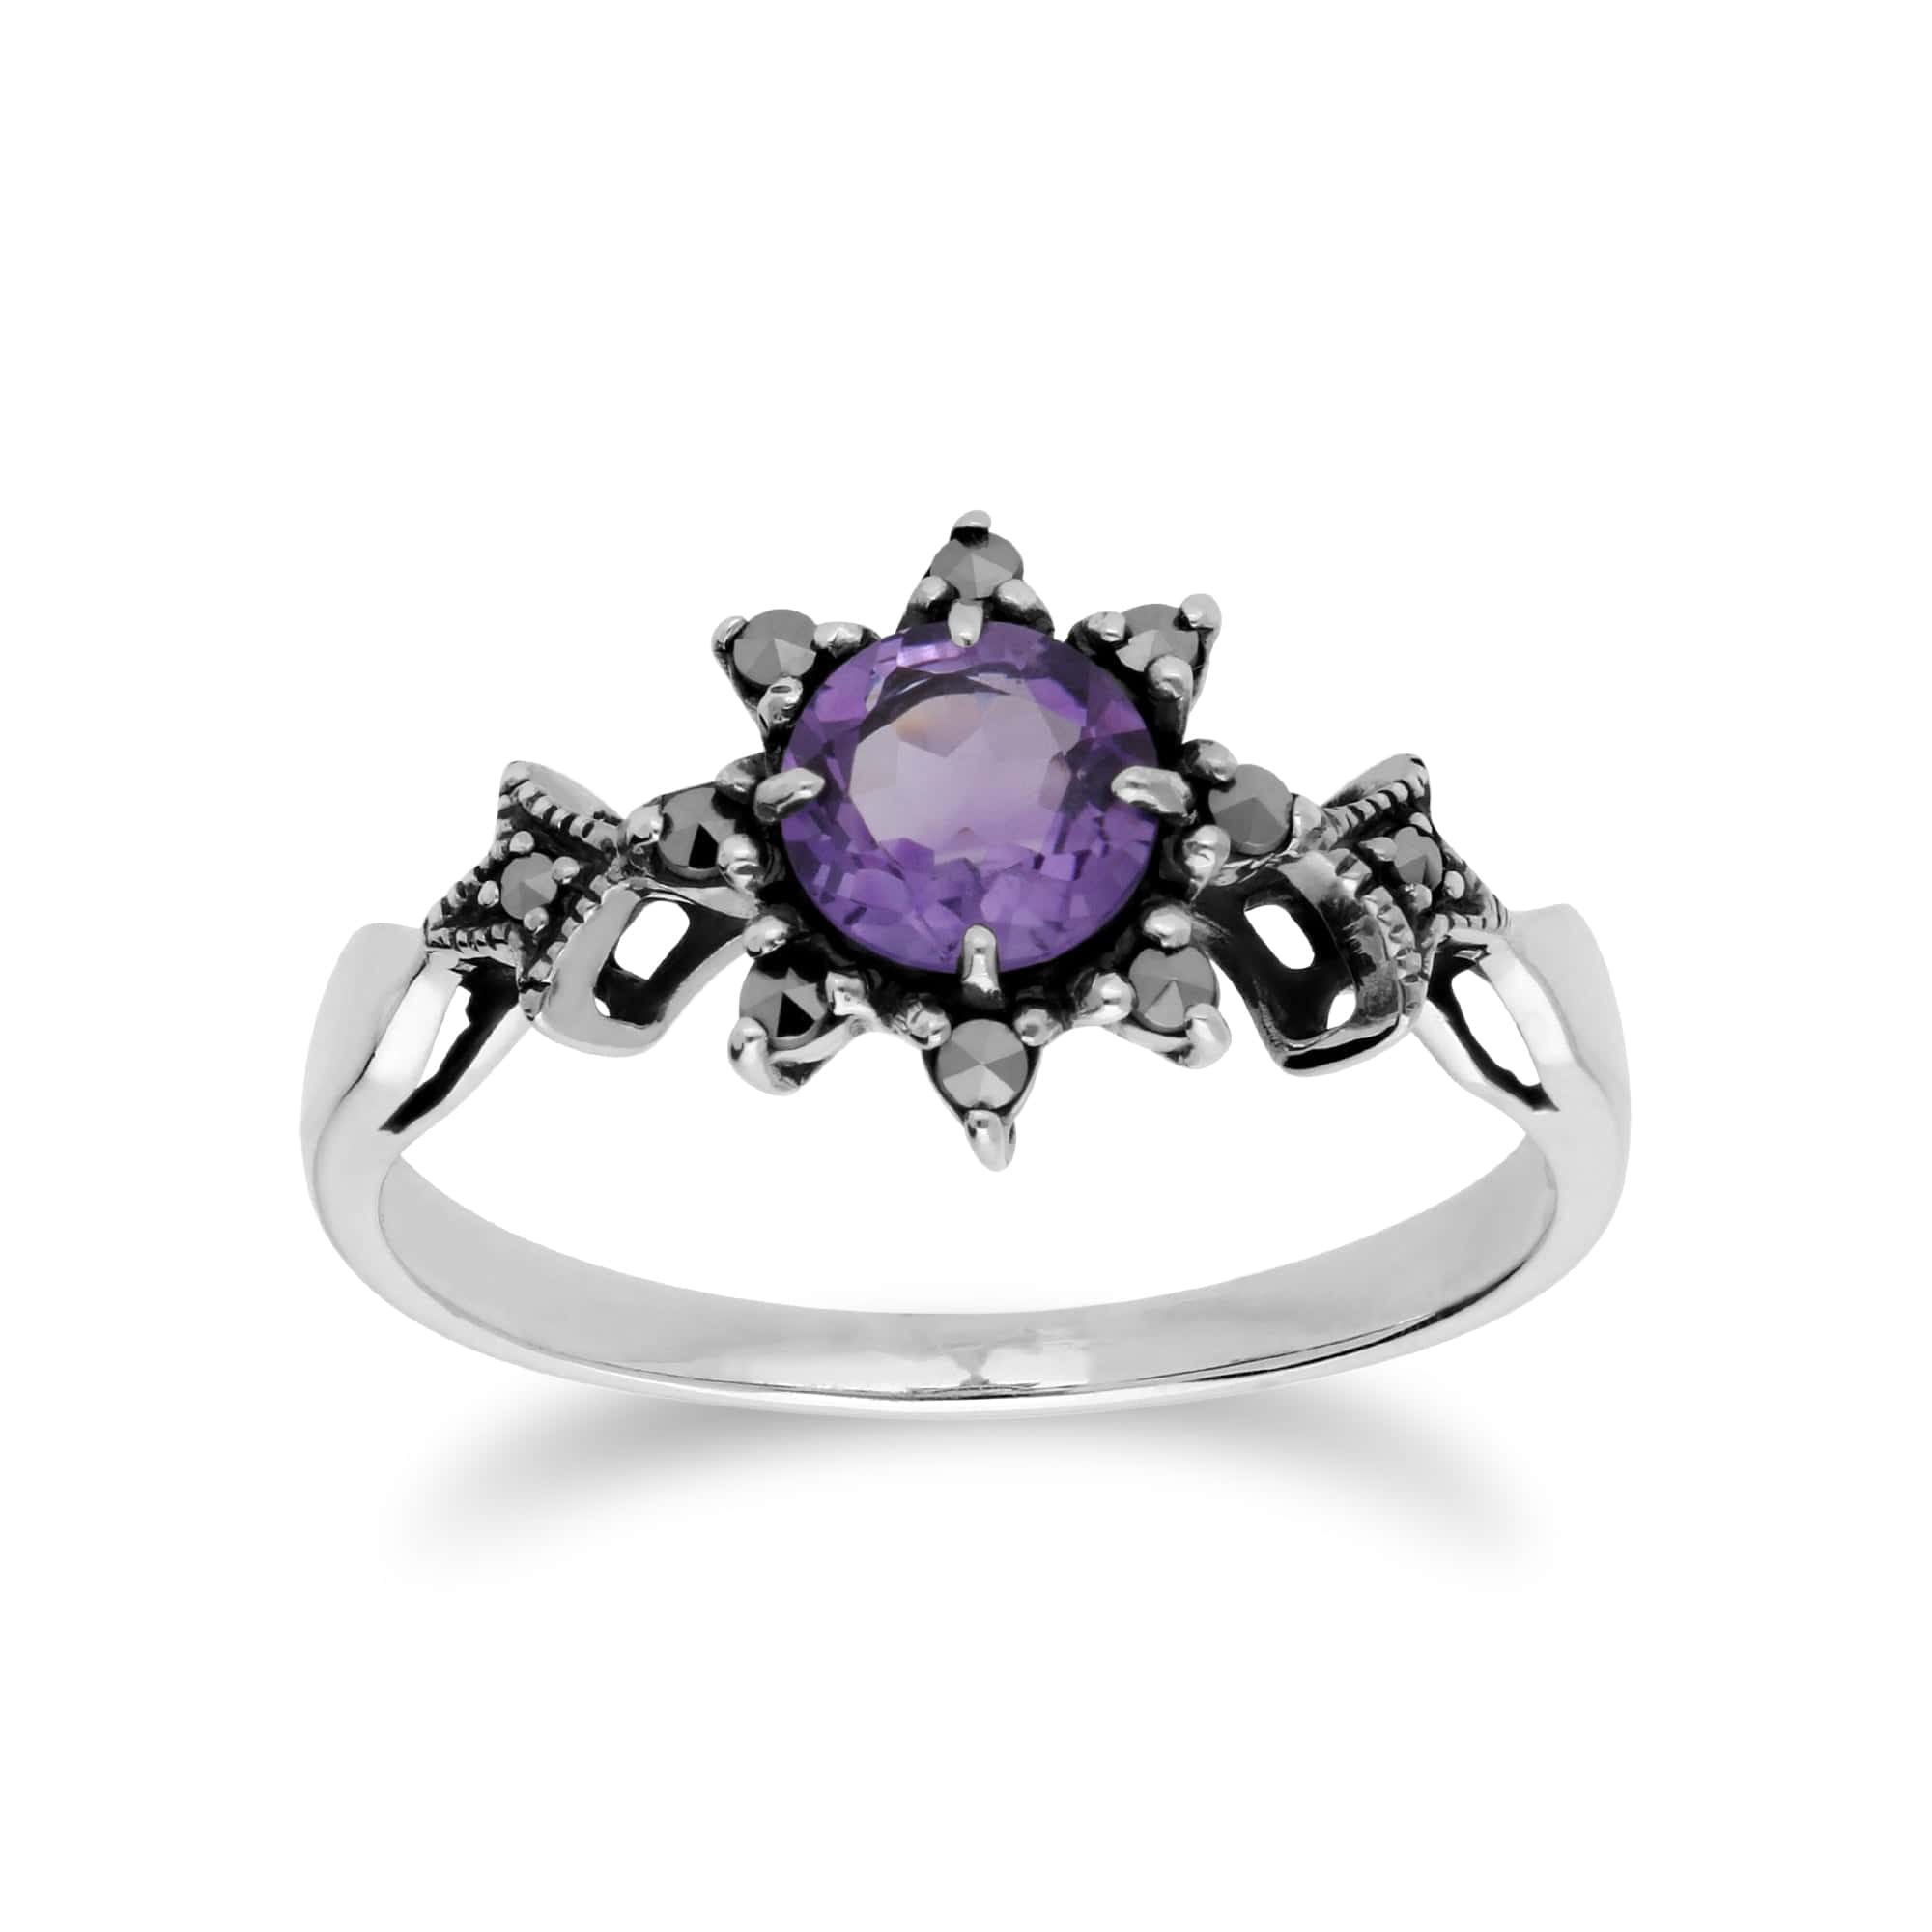 214R599502925 Art Nouveau Style Round Amethyst & Marcasite Floral Ring in 925 Sterling Silver 1